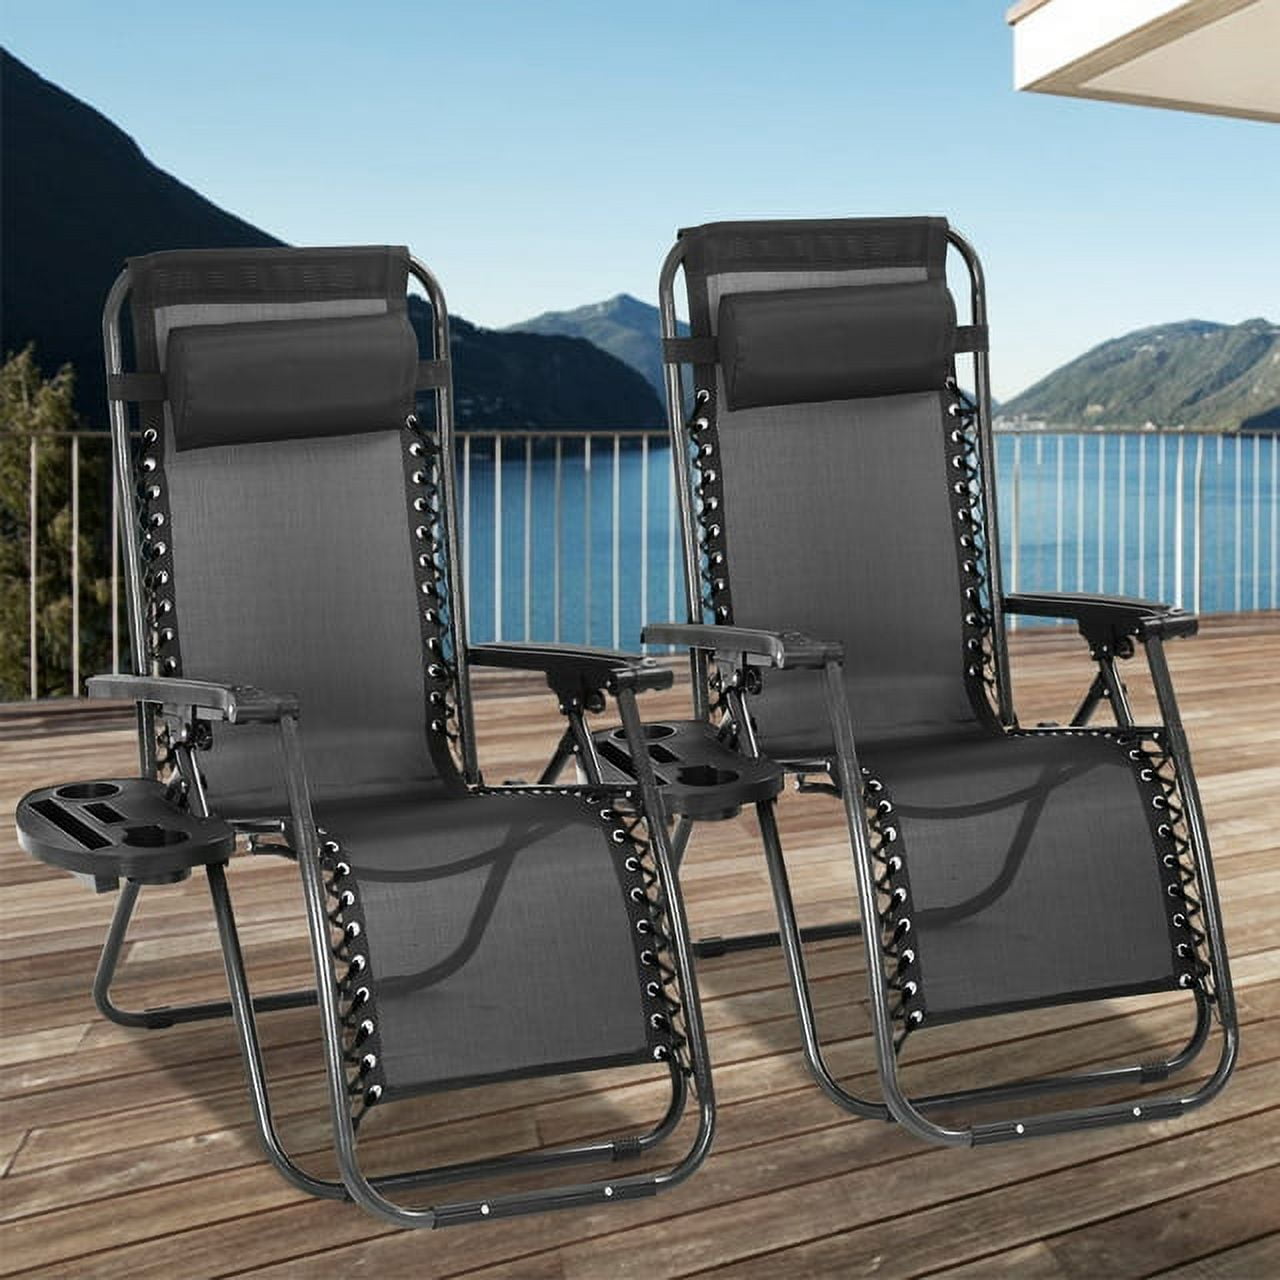 NiamVelo Zero Gravity Chairs Set of 2 Folding Patio Chair Adjustable Outdoor Lounge Chairs with Pillow & Cup Holder, Black, Size: 26 W×42.5H inch